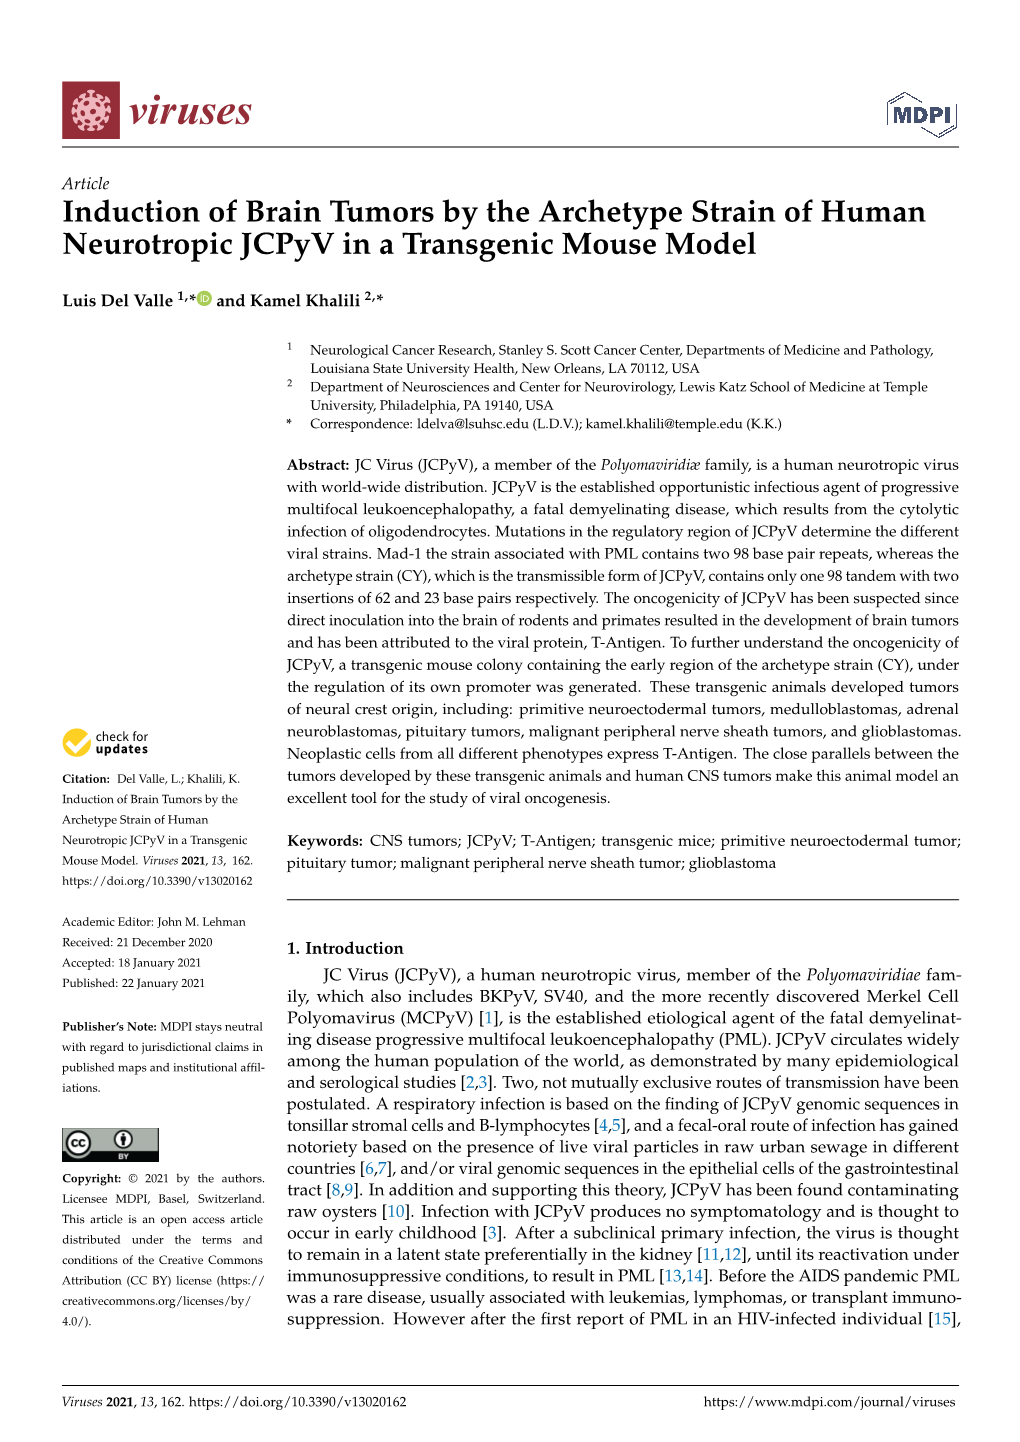 Induction of Brain Tumors by the Archetype Strain of Human Neurotropic Jcpyv in a Transgenic Mouse Model